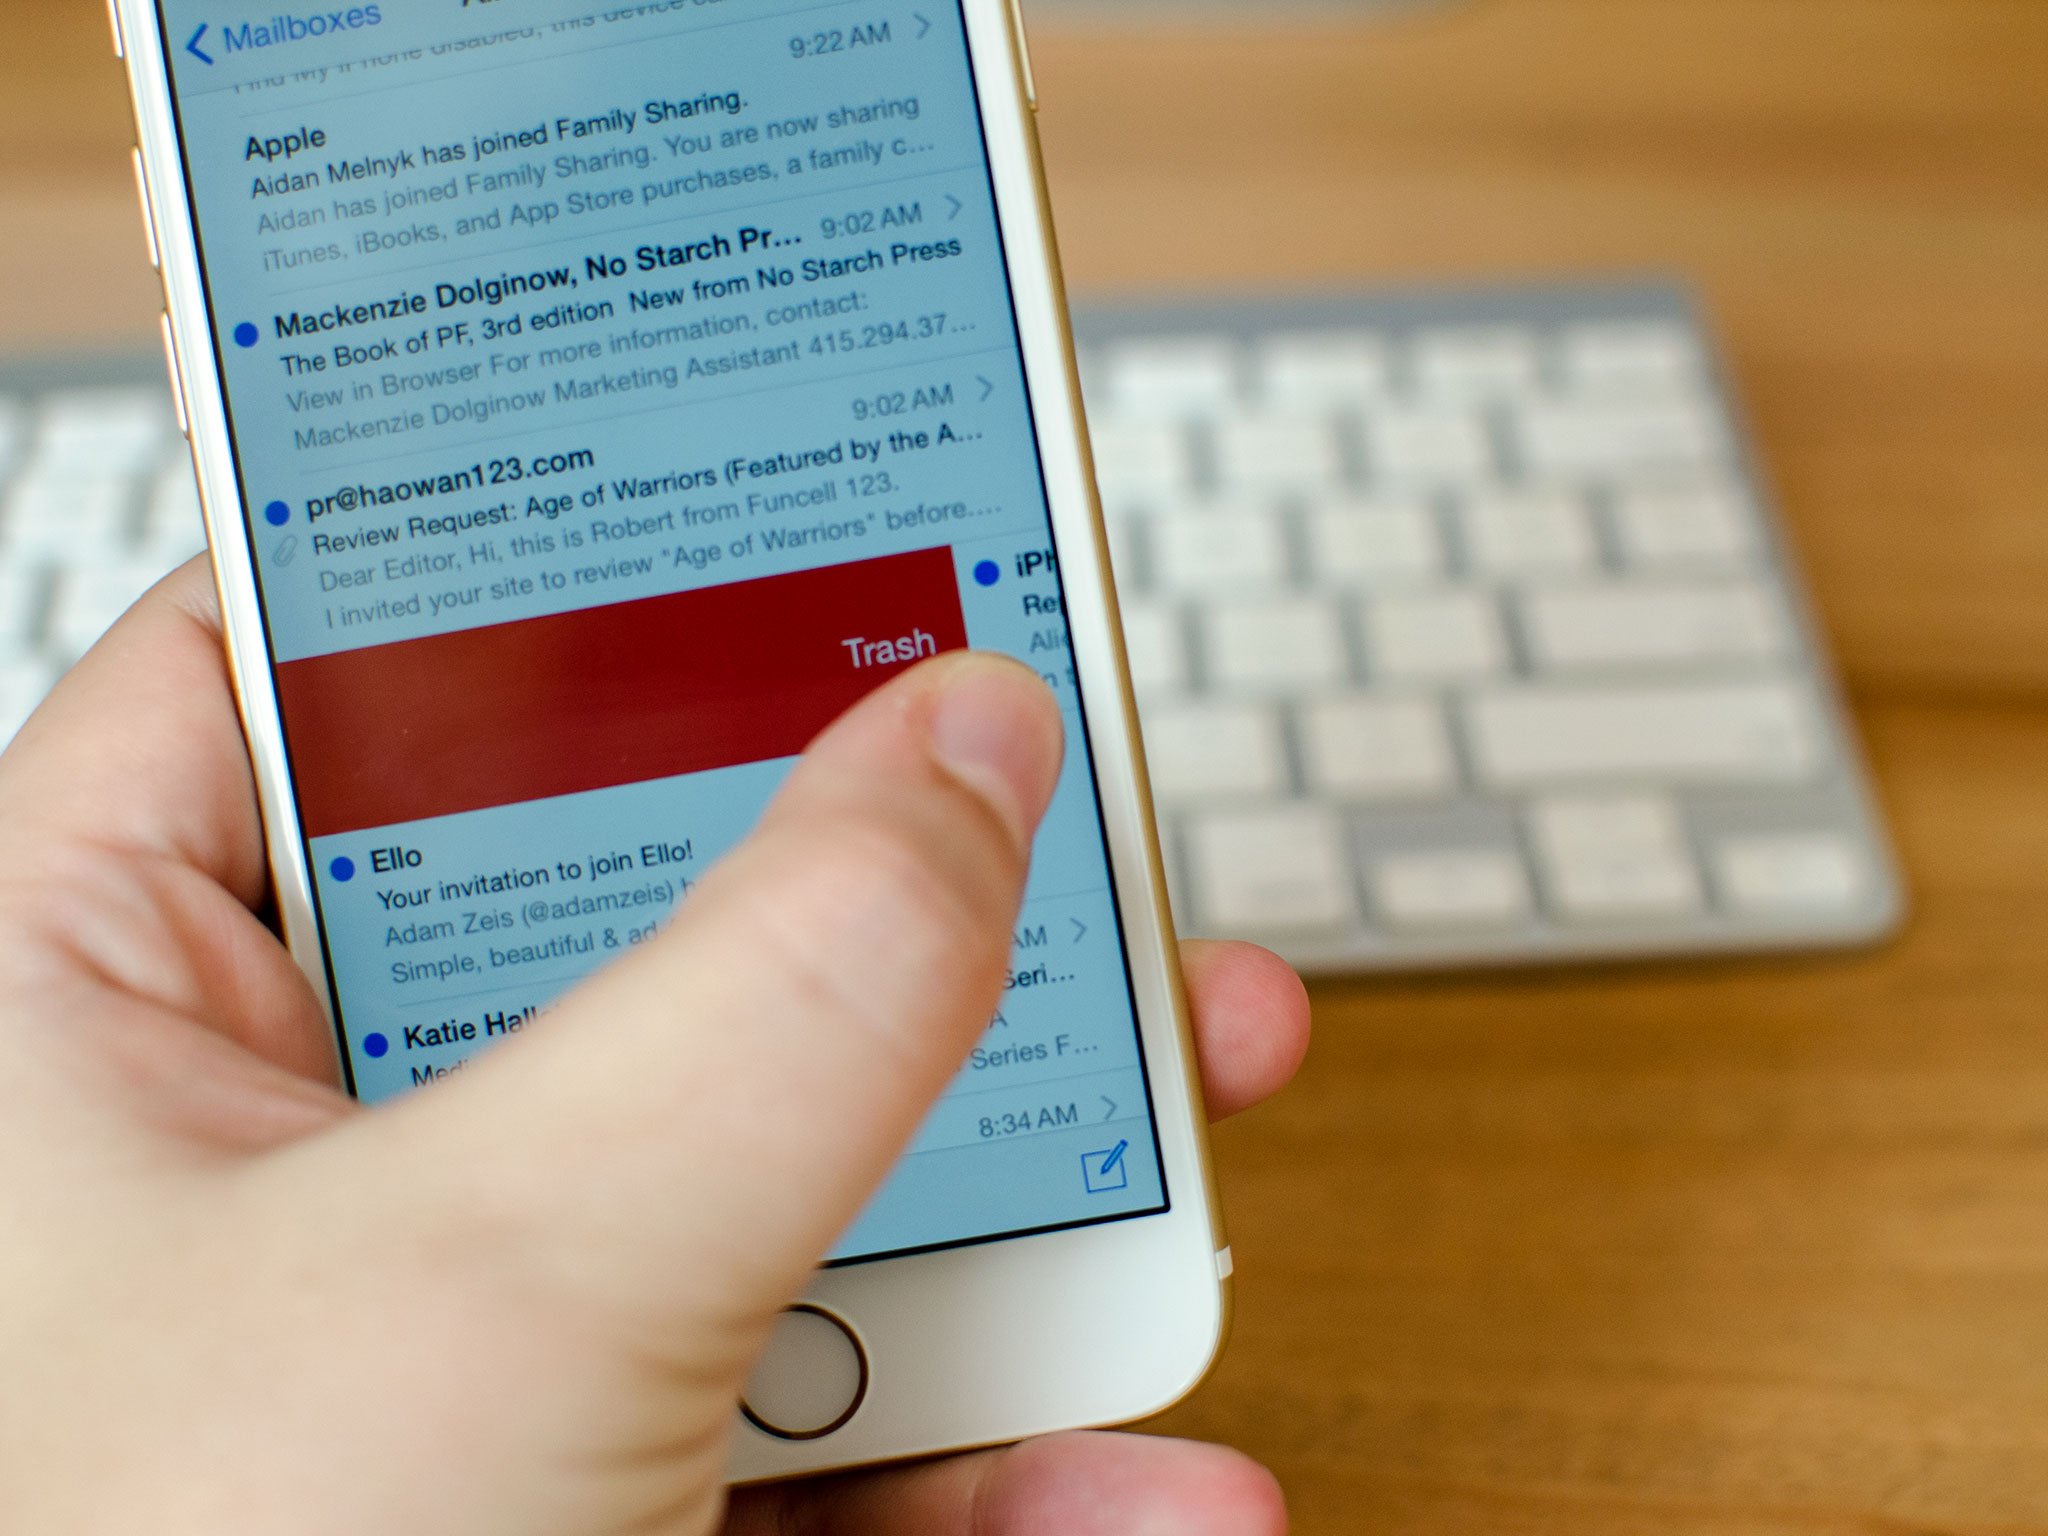 How to use archive and trash simultaneously in the iOS 8 Mail app